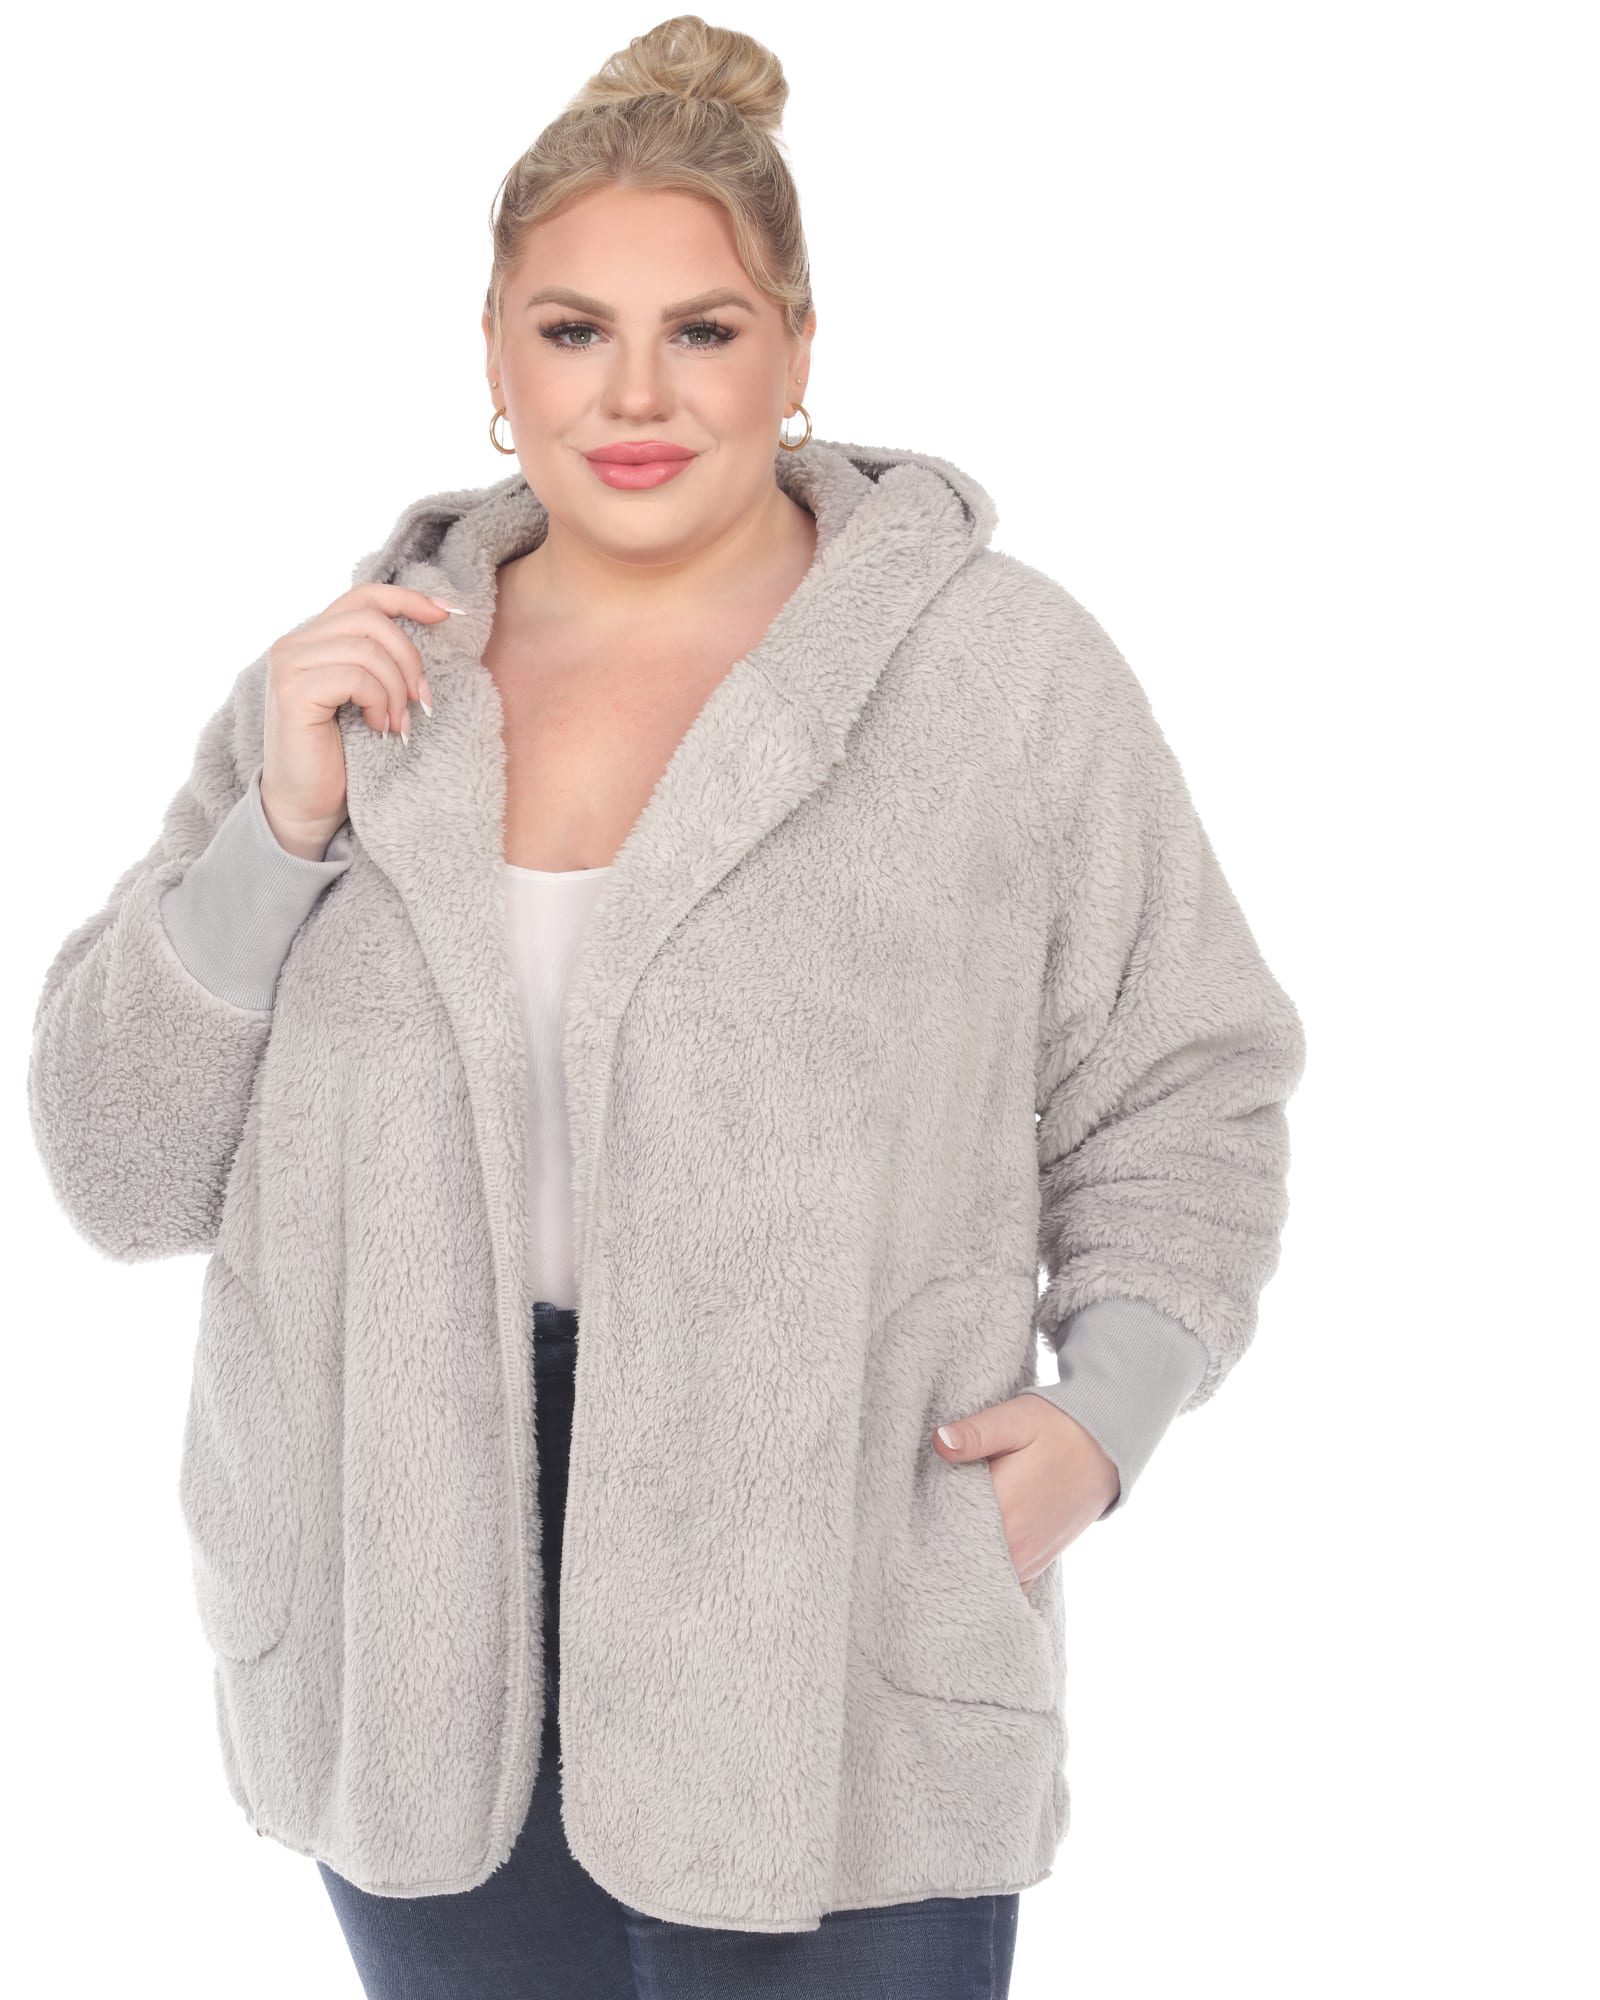 Plush Hooded Cardigan with Pockets | Grey